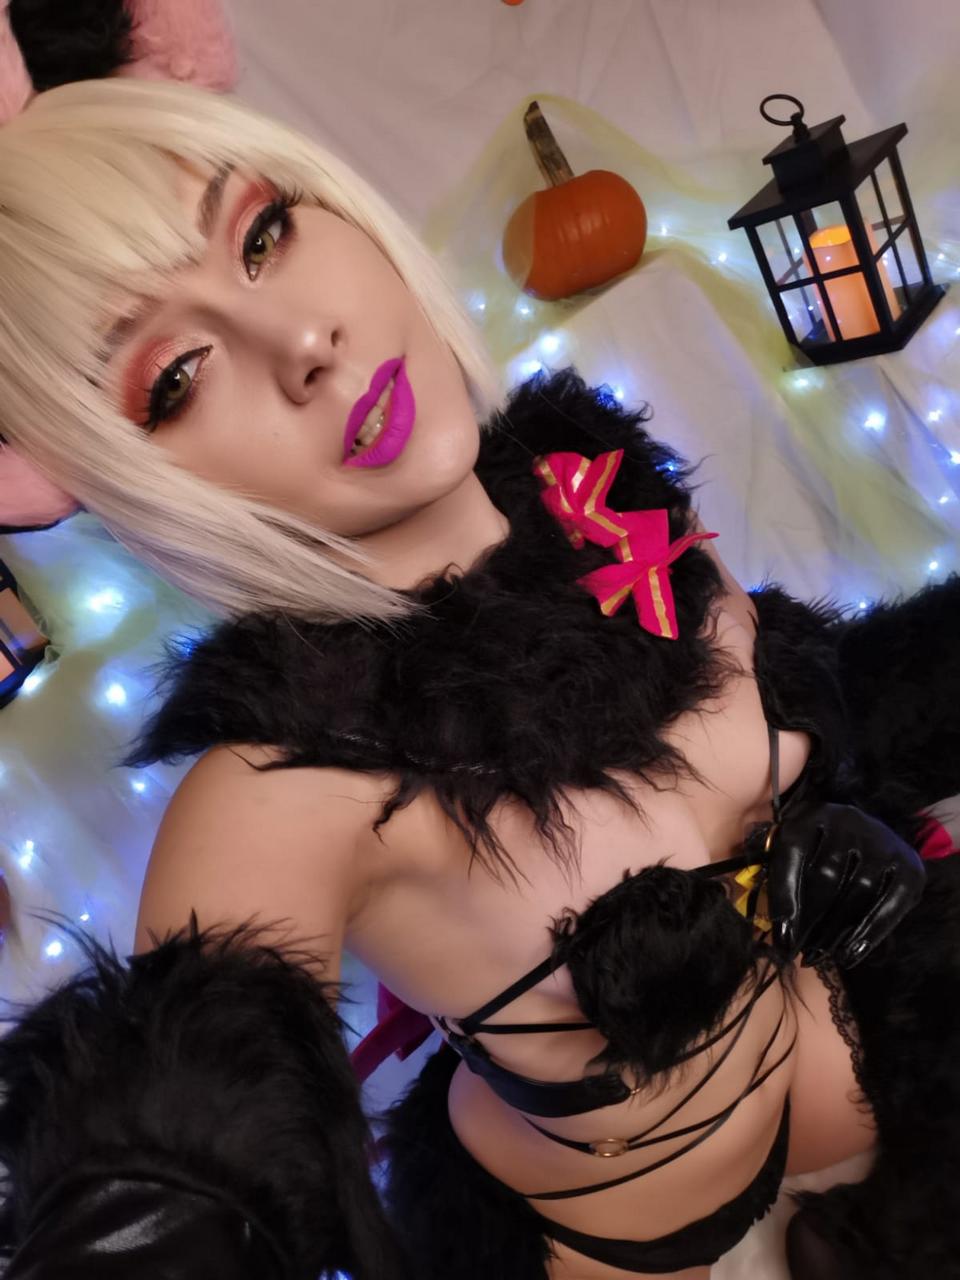 Saber Alter Beast From Fate Grand Order By Hoshik